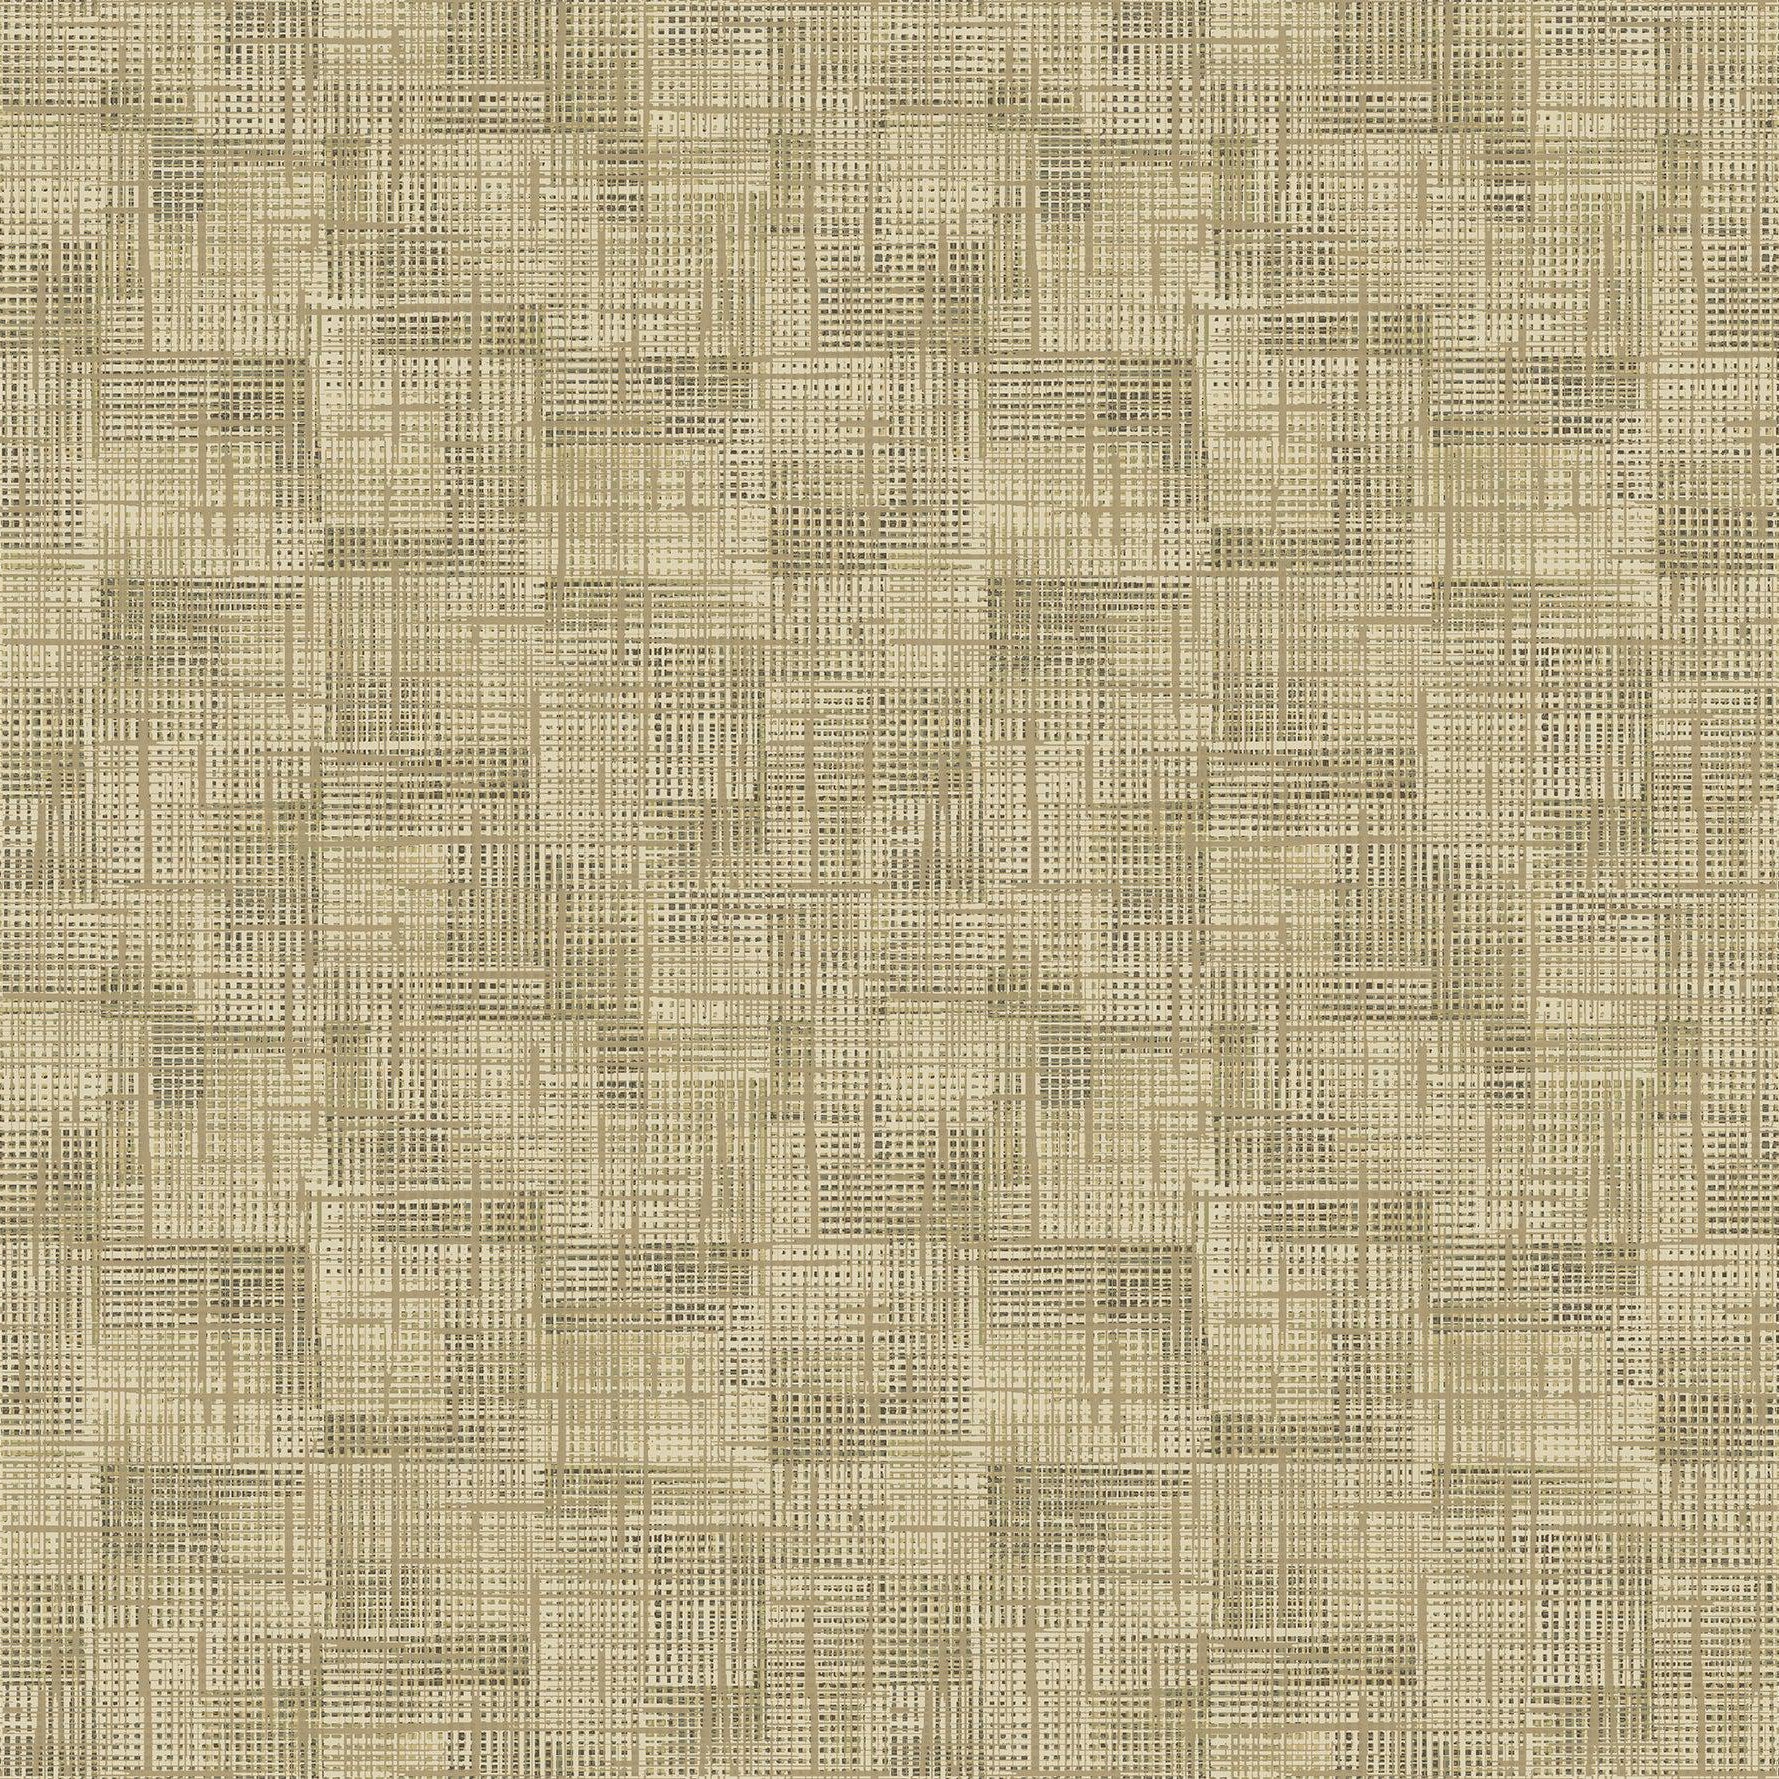 Looking for 2971-86160 Dimensions Ting Brown Abstract Woven Brown A-Street Prints Wallpaper